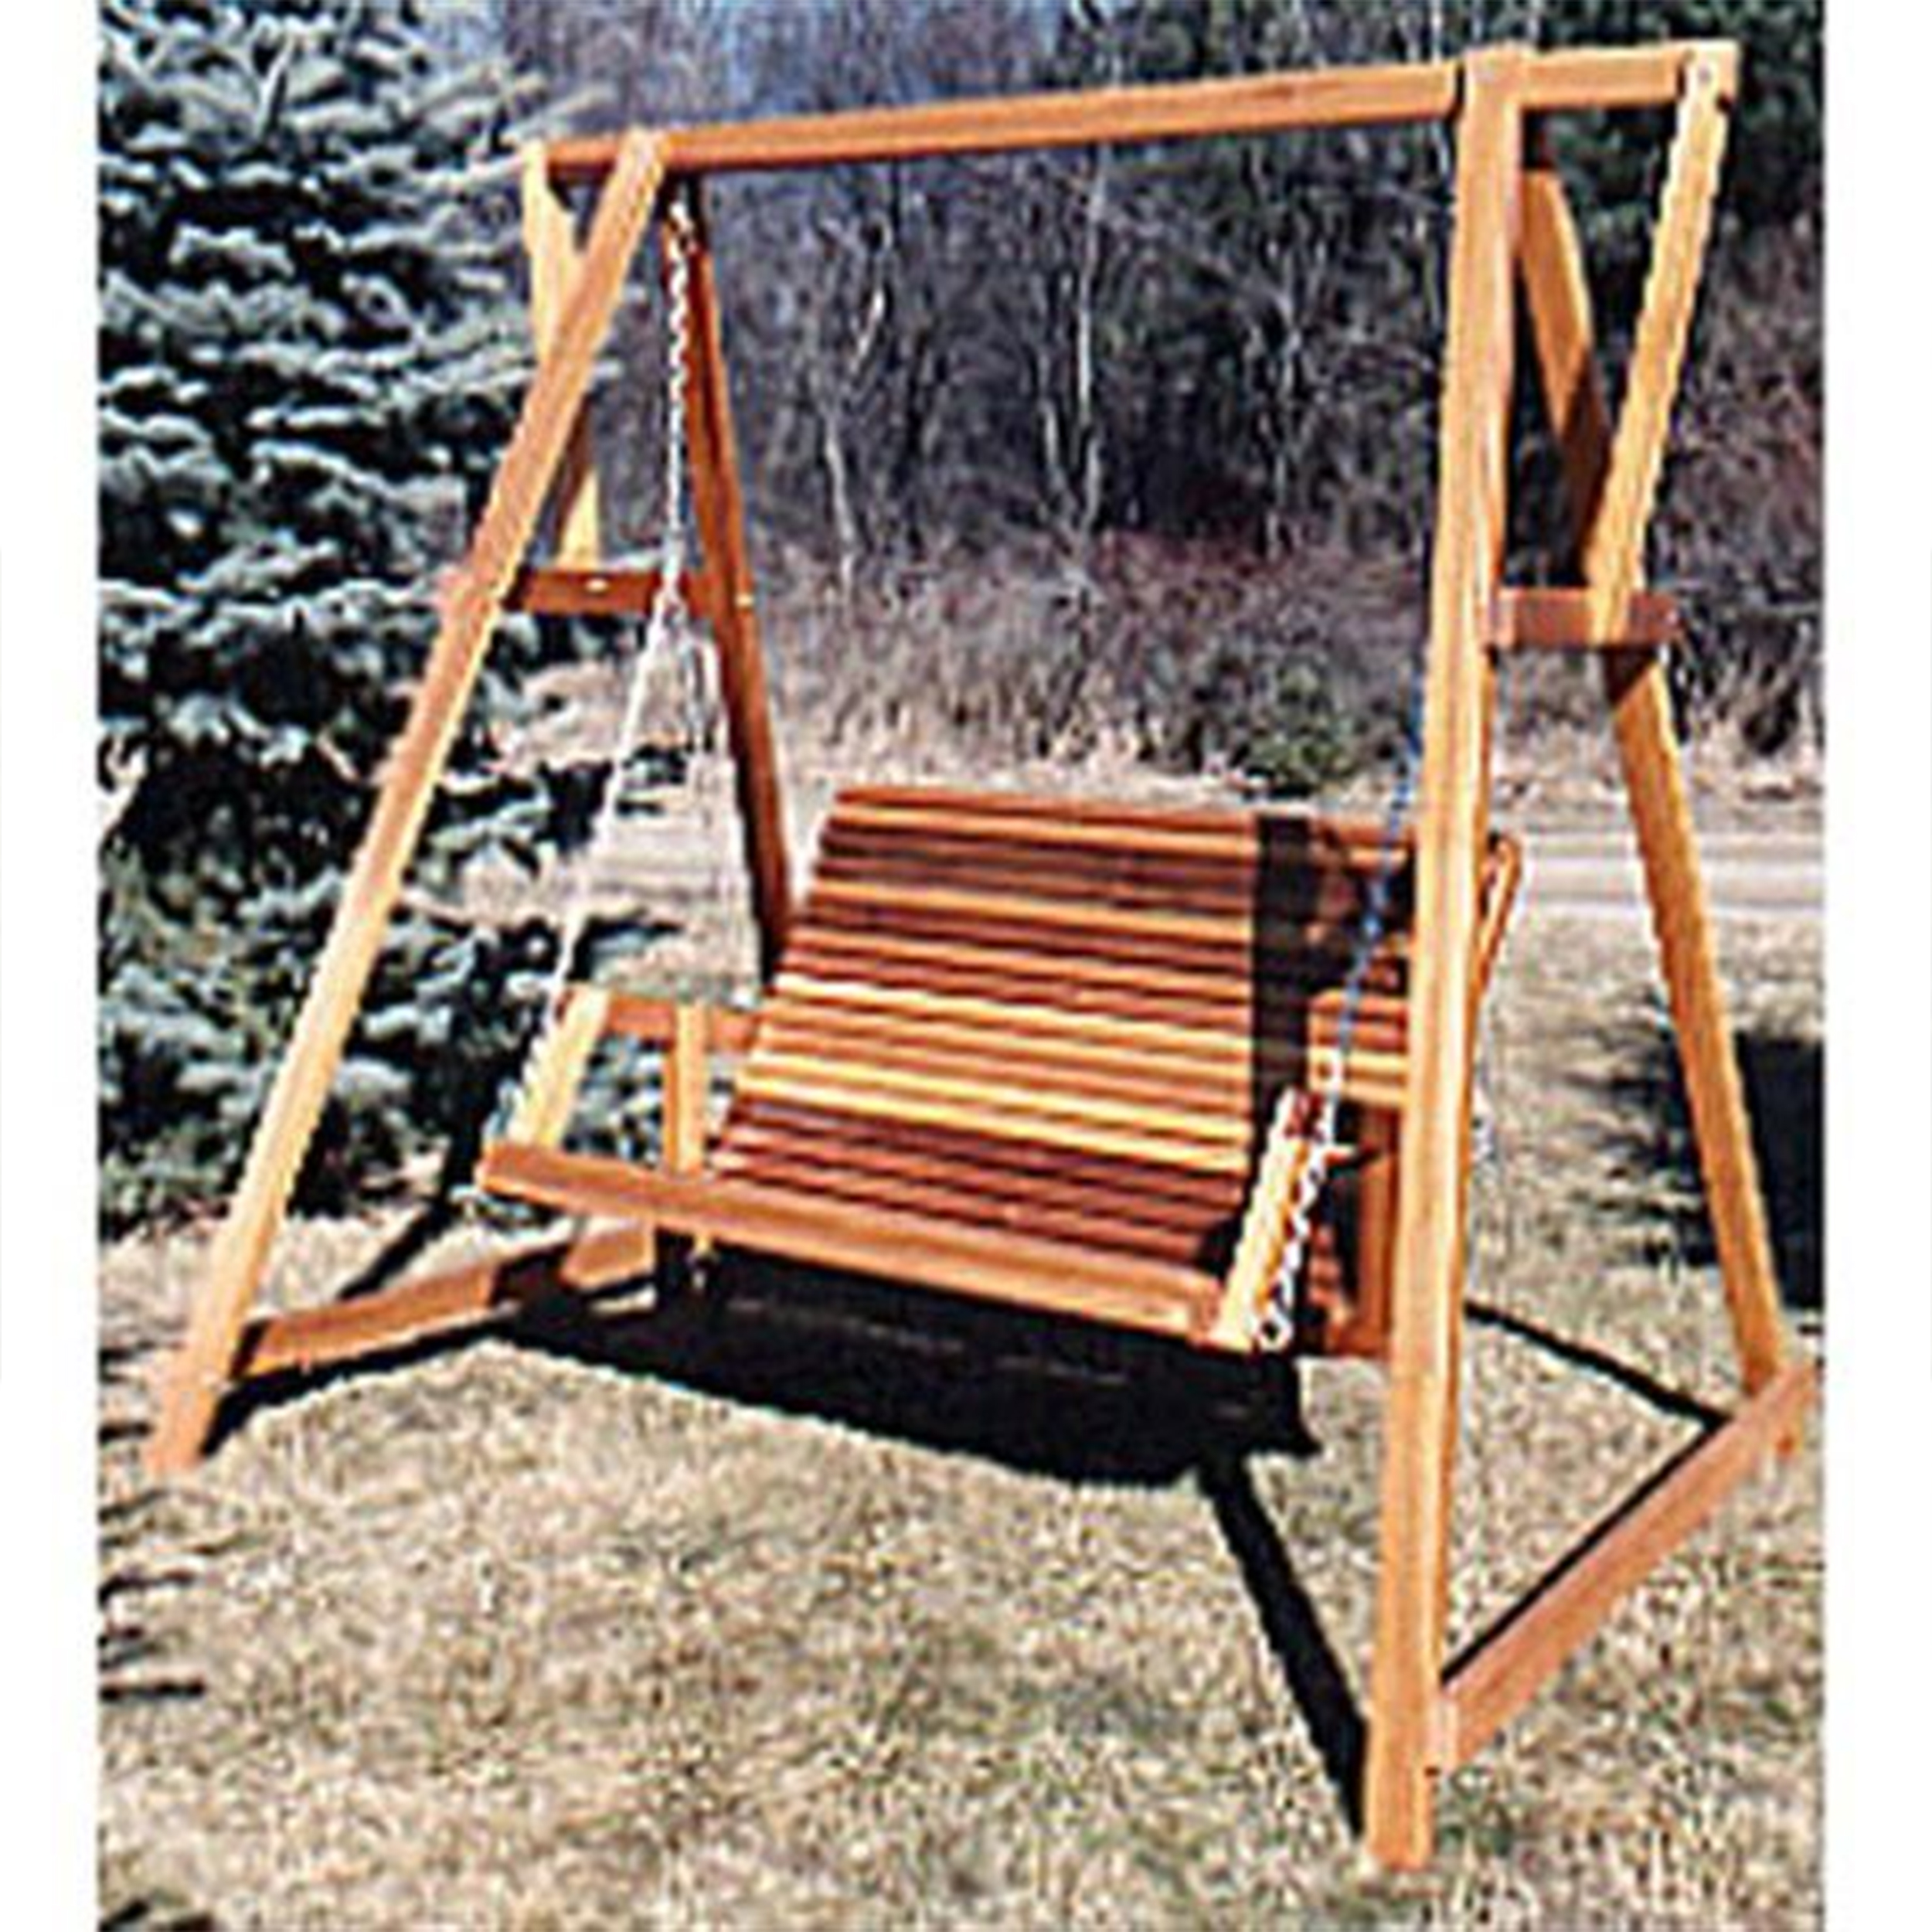 Woodworking Project Paper Plan To Build Patio Swing And Stand